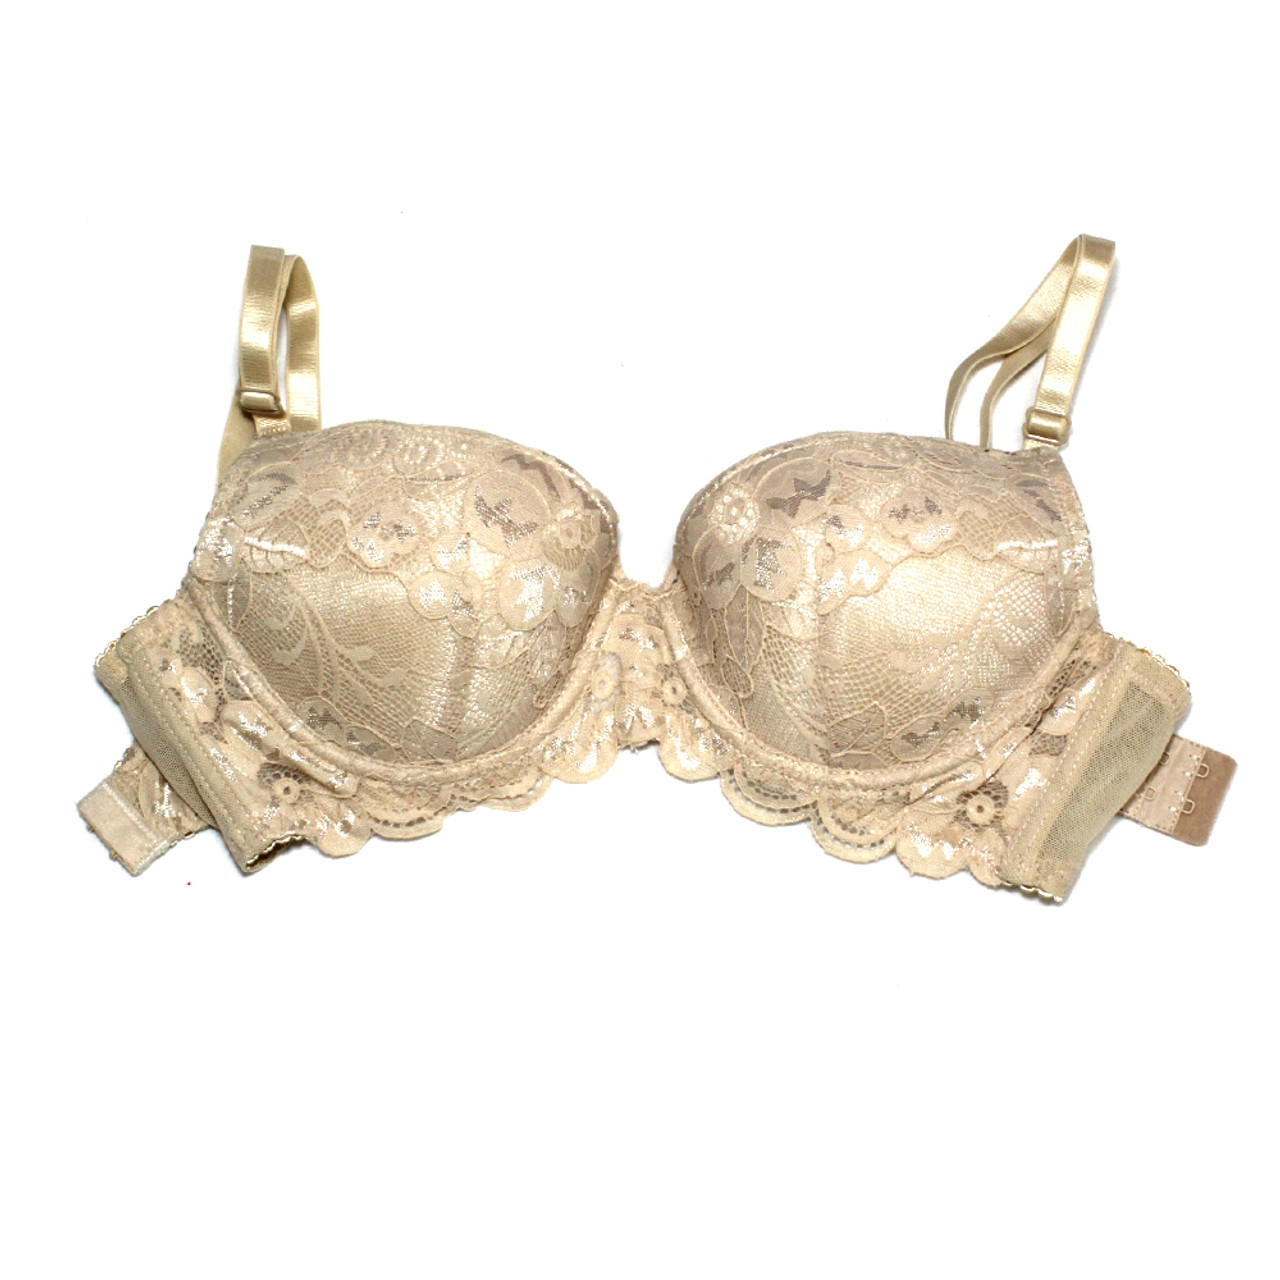  FLORES PURE WONDER Womens Balconette Lingerie Adjustable  Support Push Up Bra (Beige, 32B) : Clothing, Shoes & Jewelry